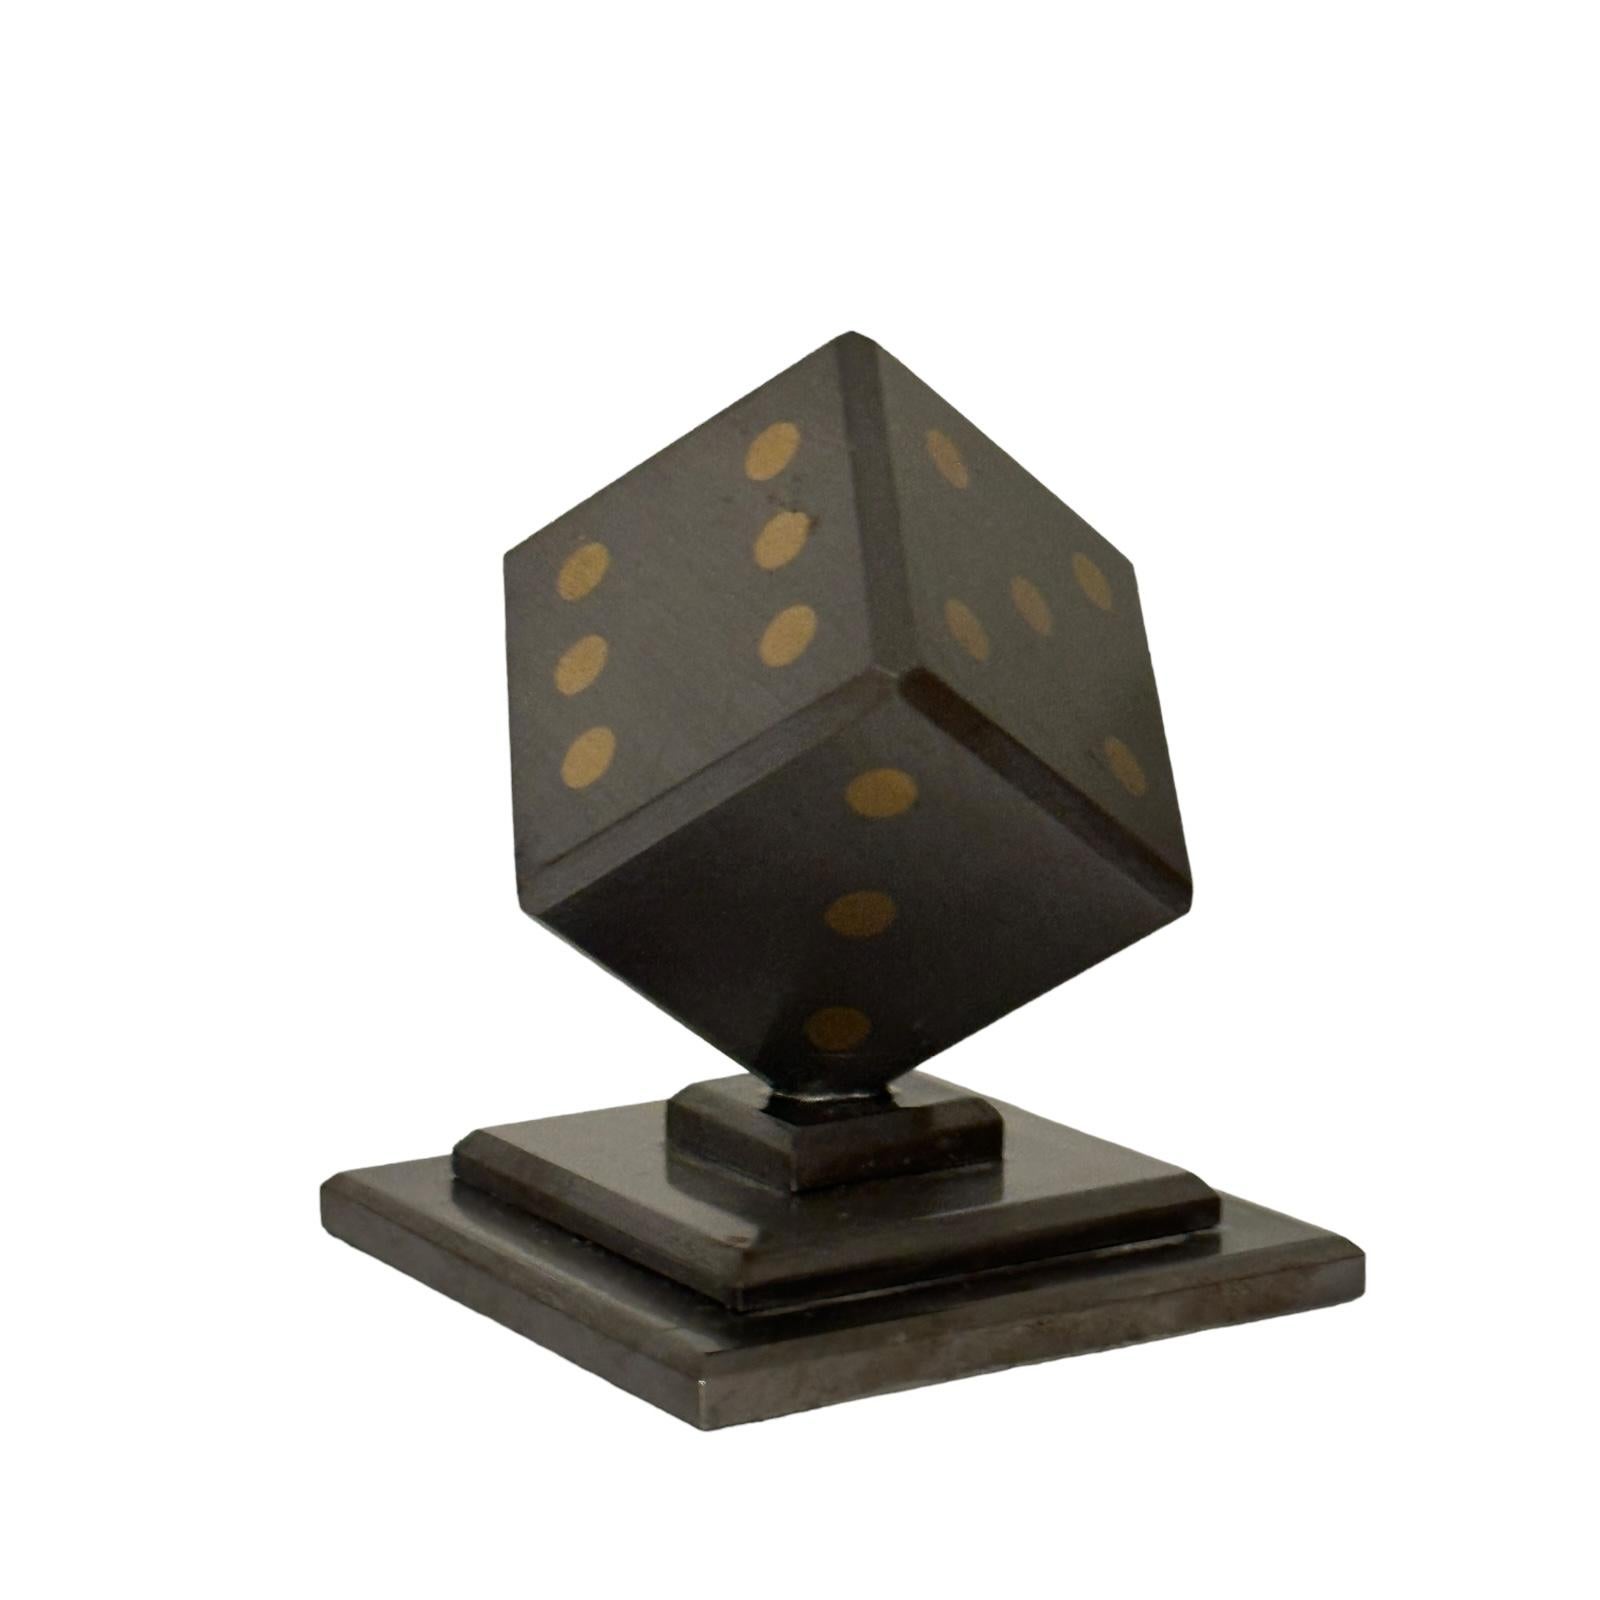 Dice Metal Statue Paper Weight Mid-Century Modern, German, 1970s For Sale 2